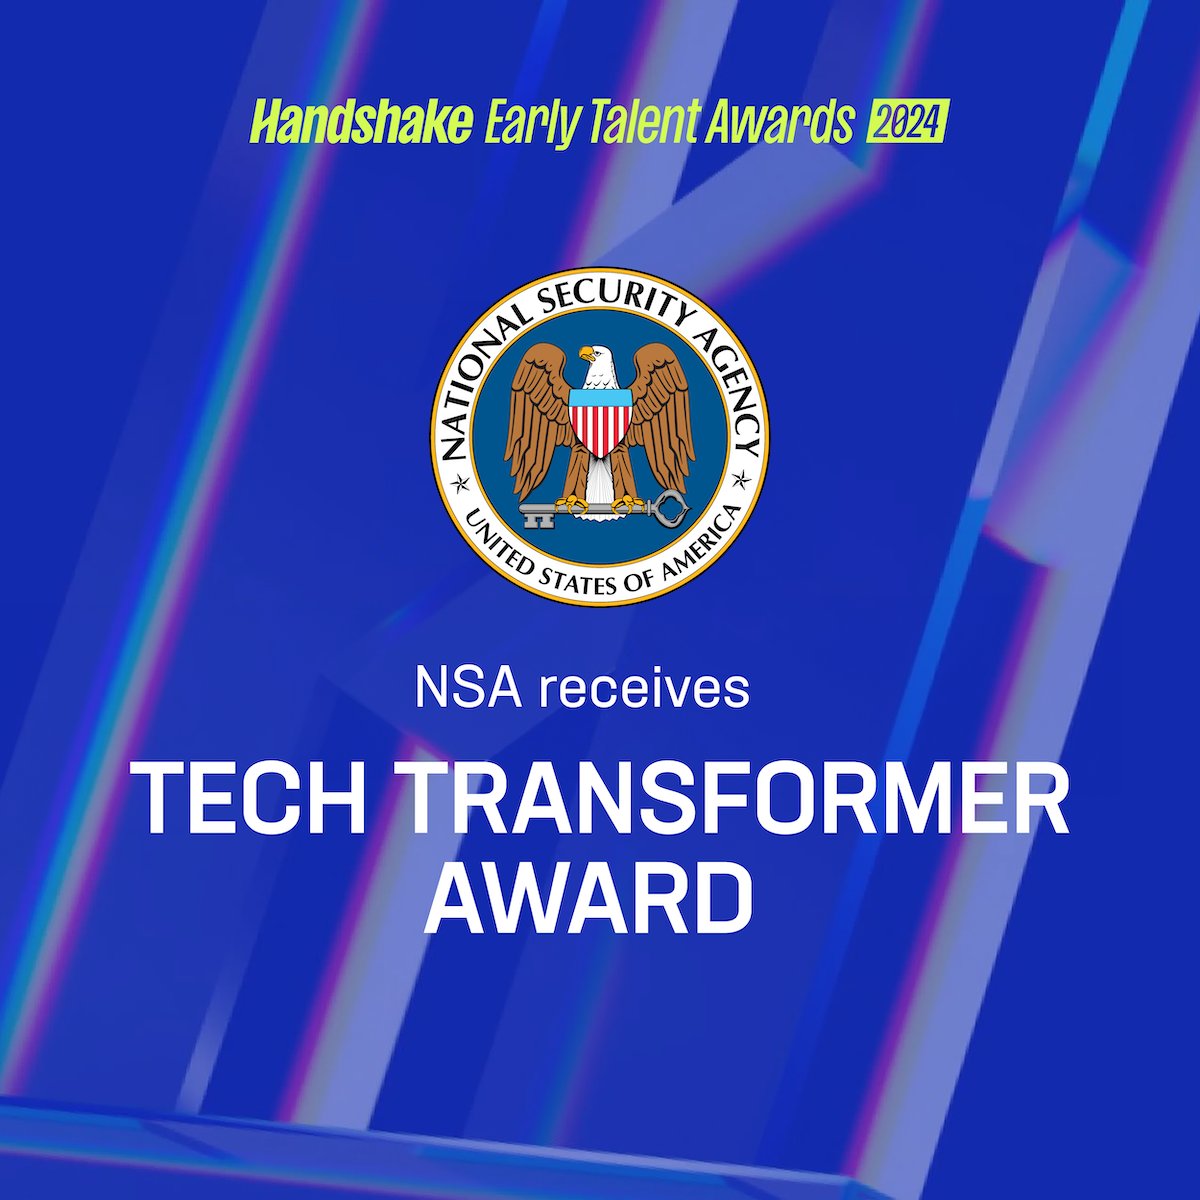 We’ve been named an Early Talent Award Winner and a Tech Transformer by @joinHandshake for 2024. Read more about this honor: bit.ly/3VA7X2x #techtransformer #techcareers